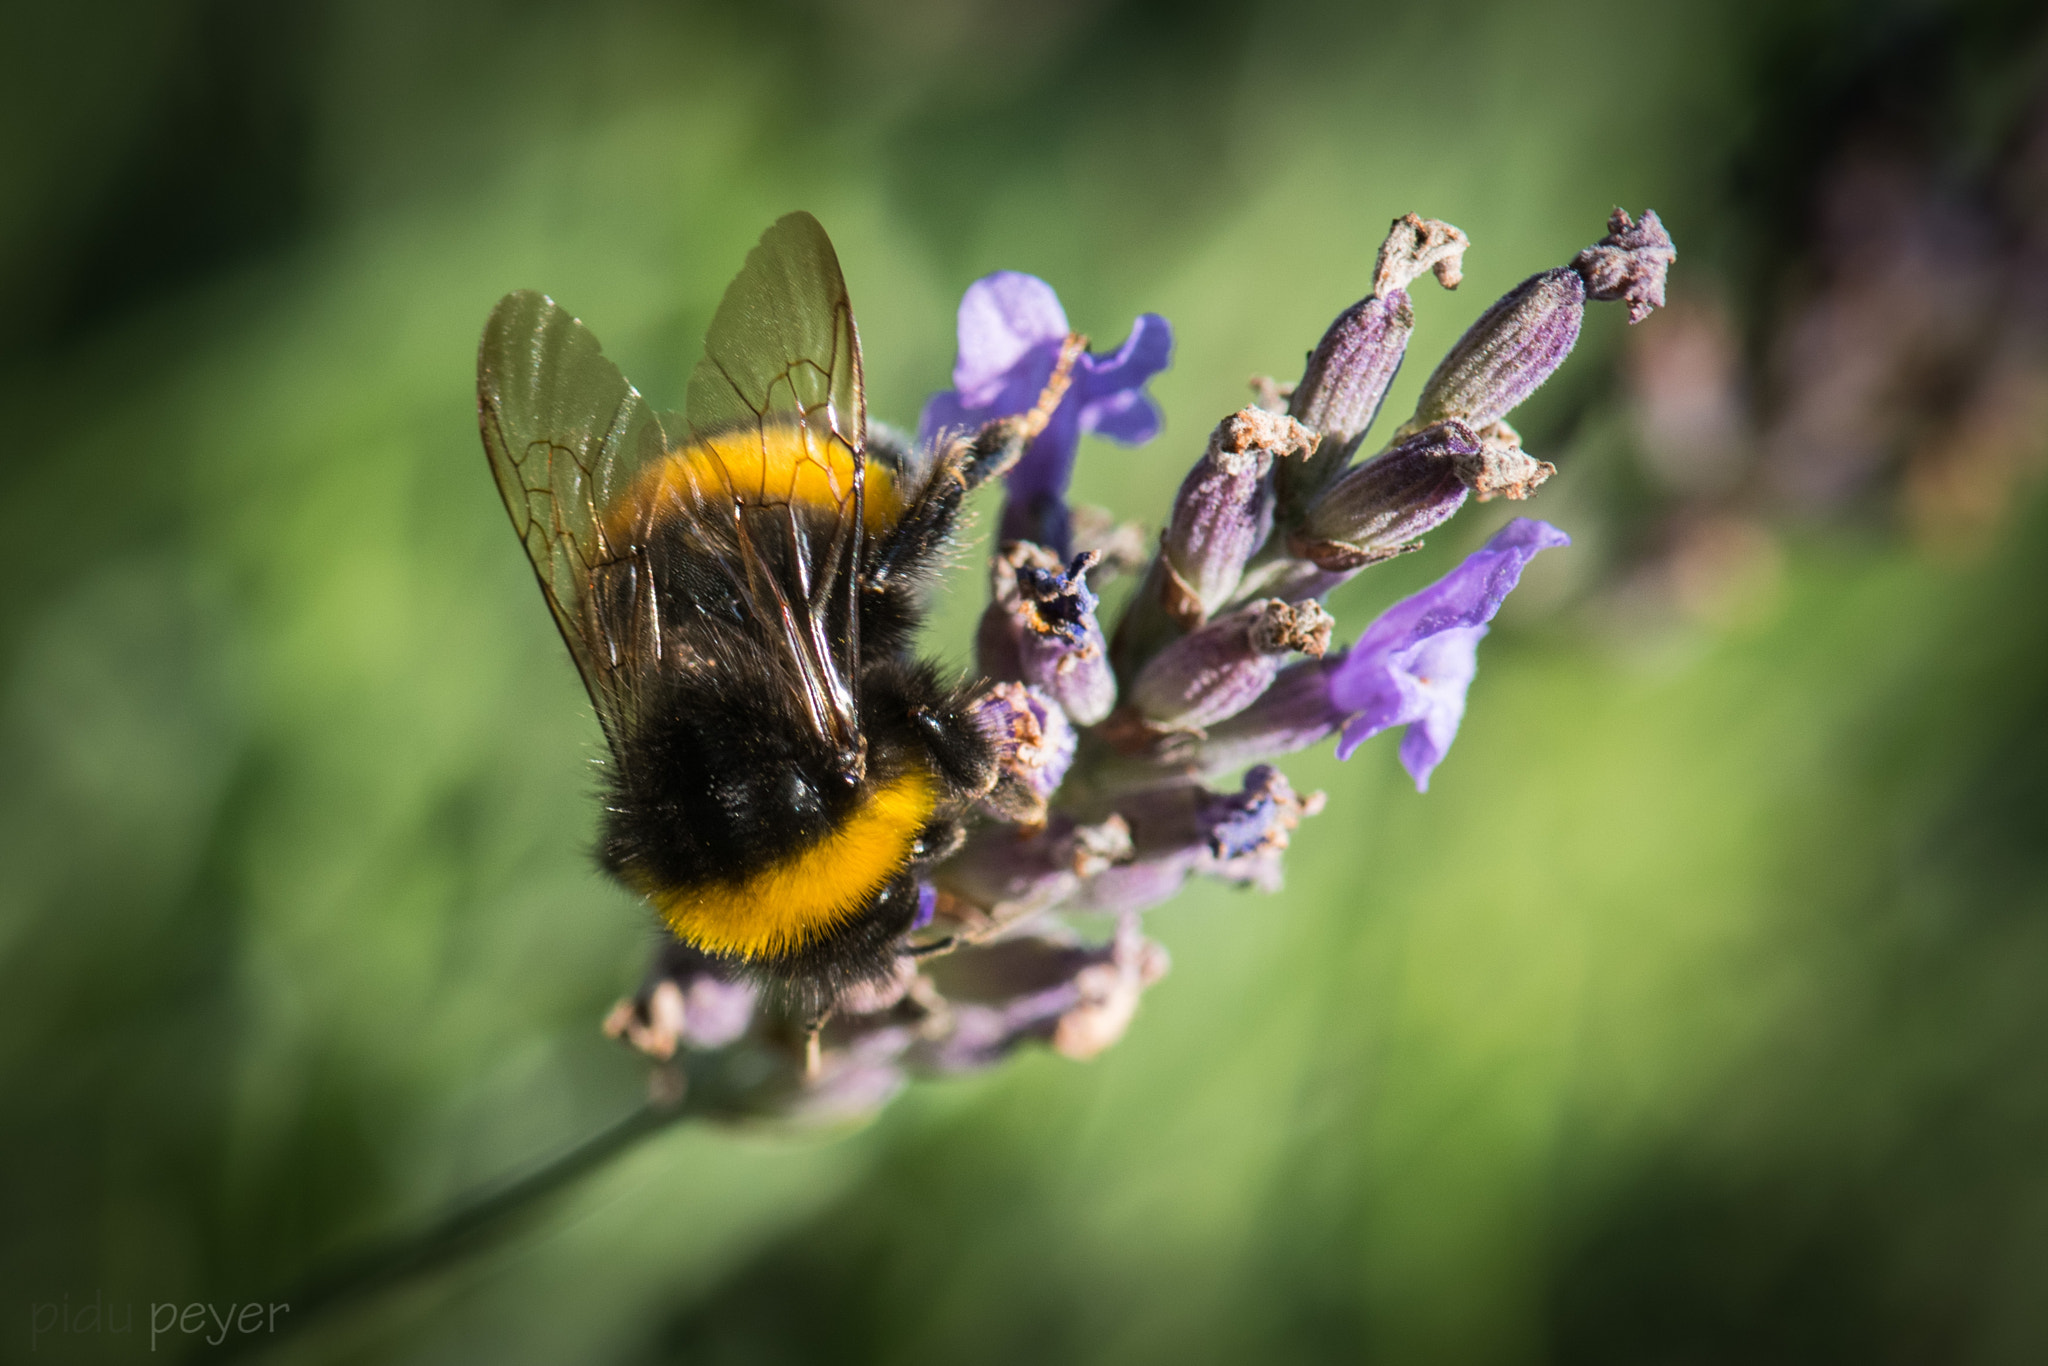 Nikon D5 sample photo. Wing structures of a bumblebee photography